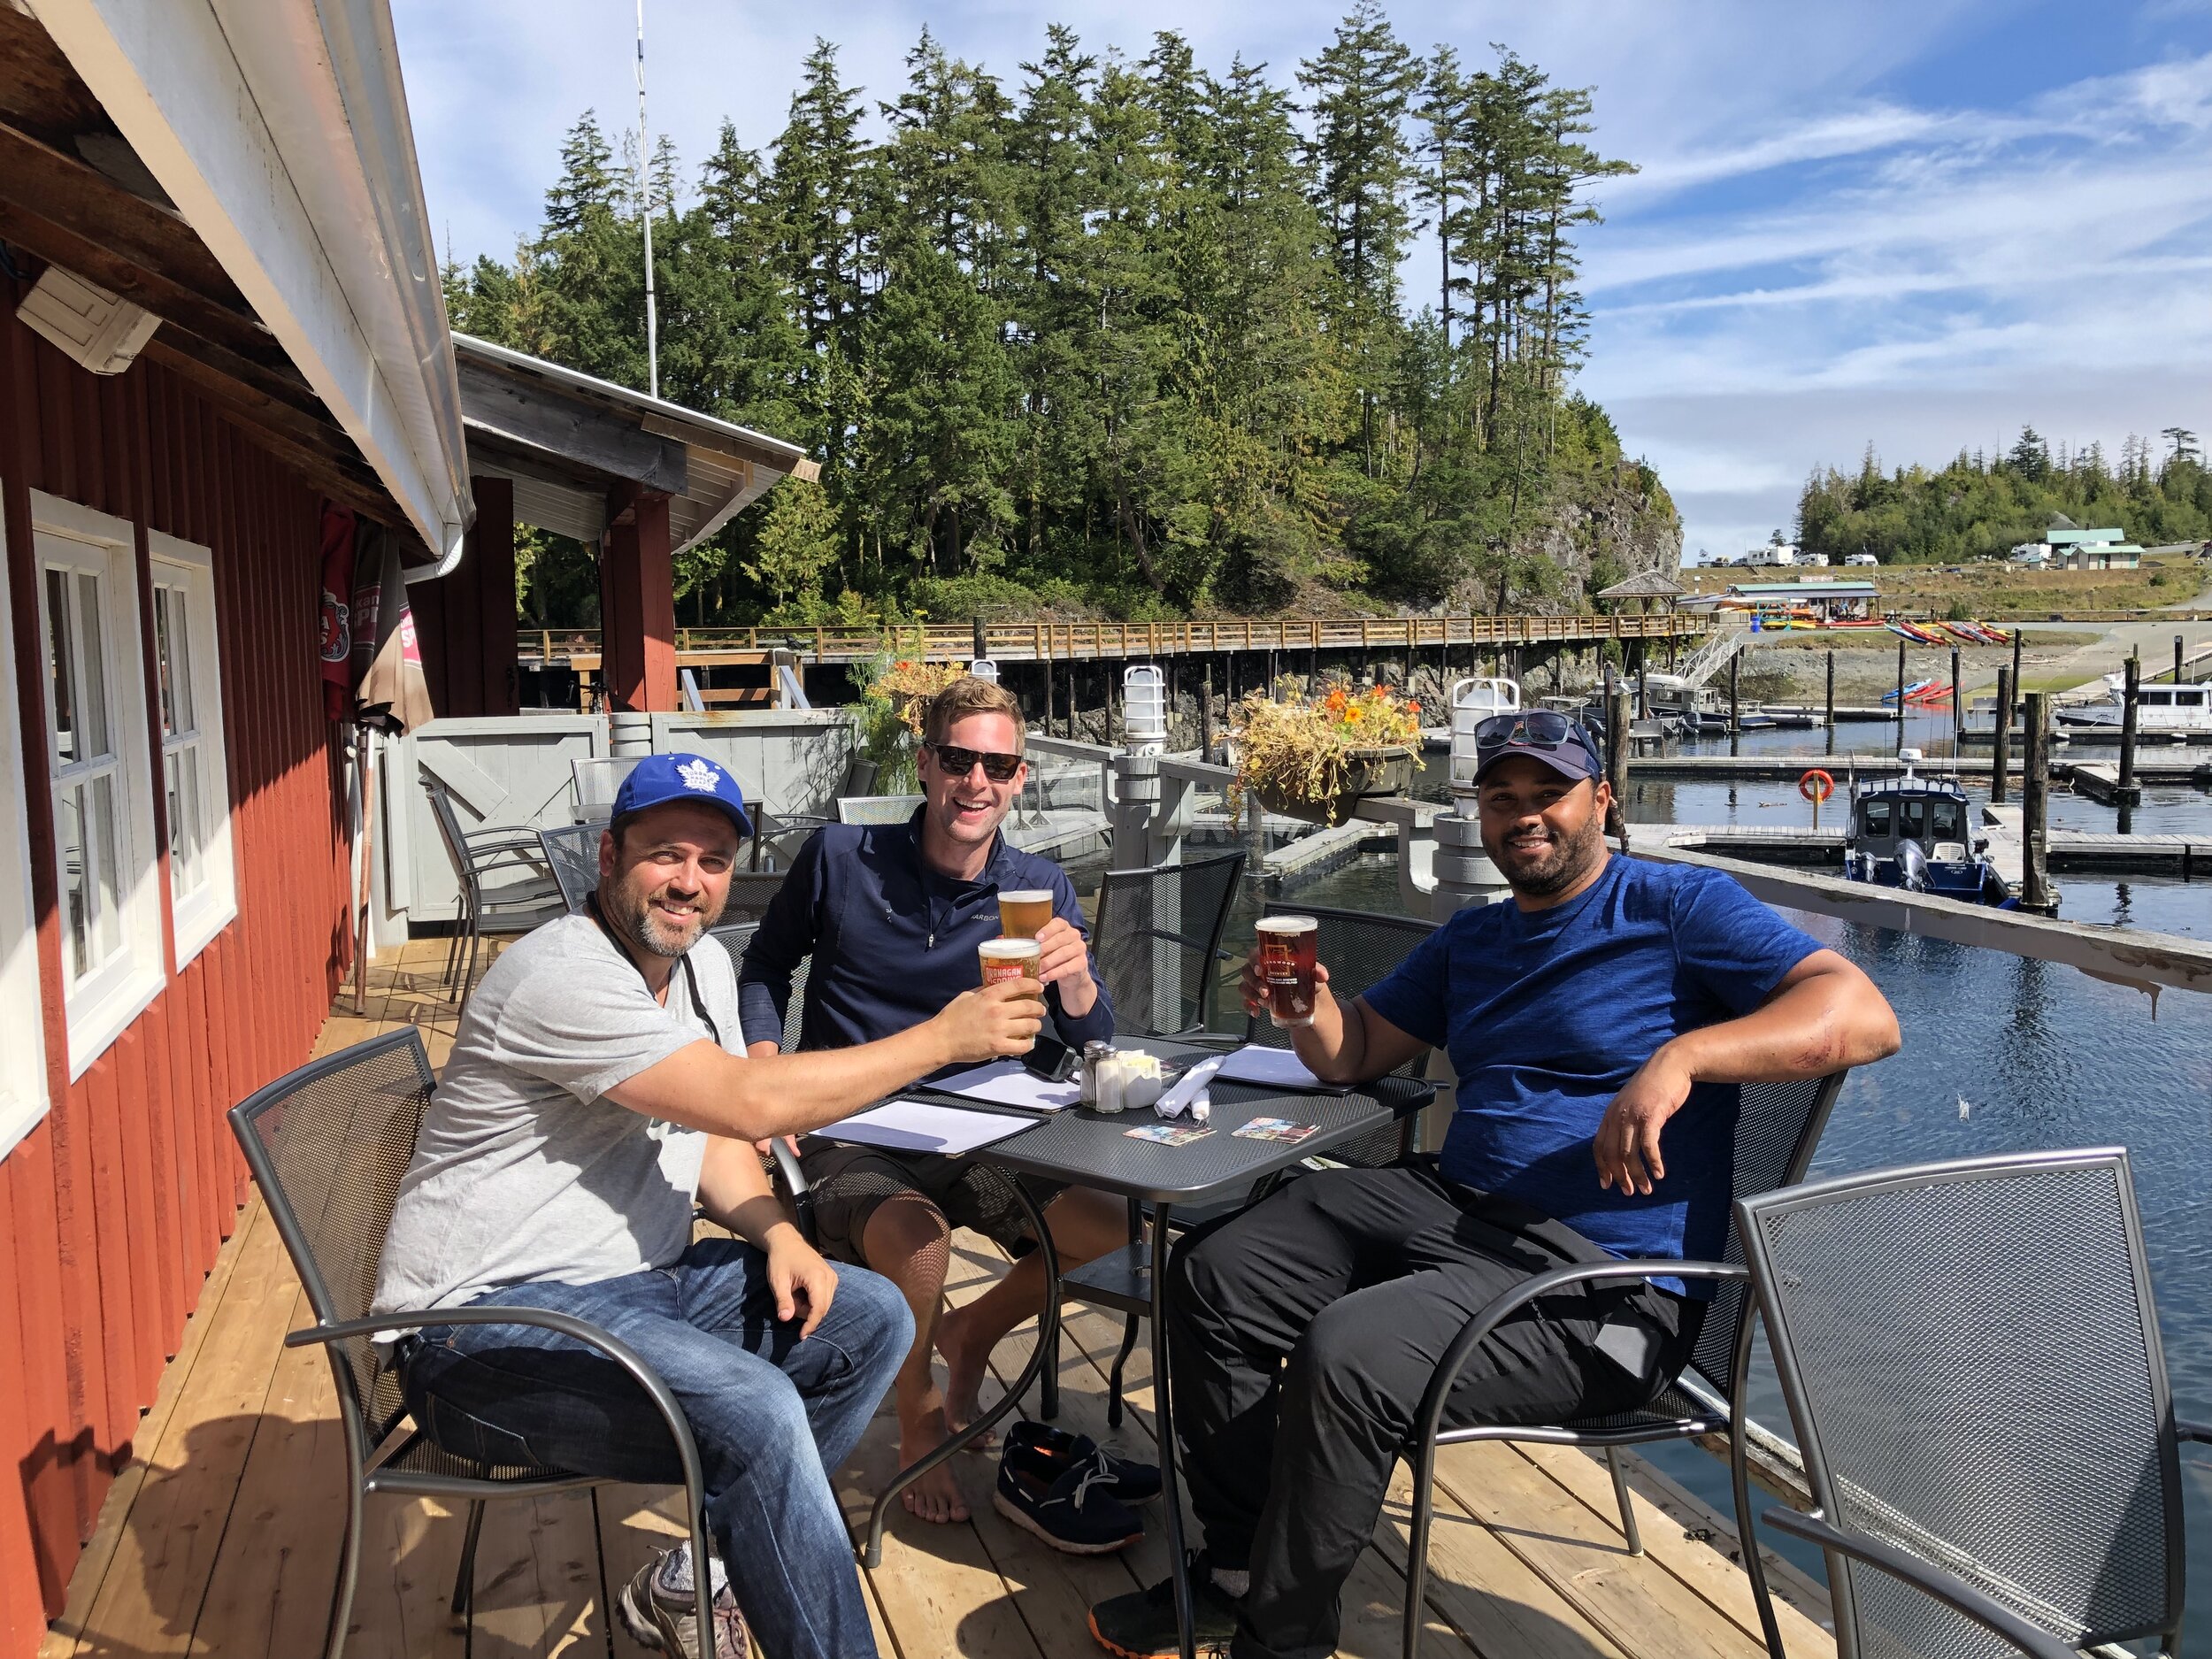  A well deserved pint in Telegraph Cove to cap the trip. 